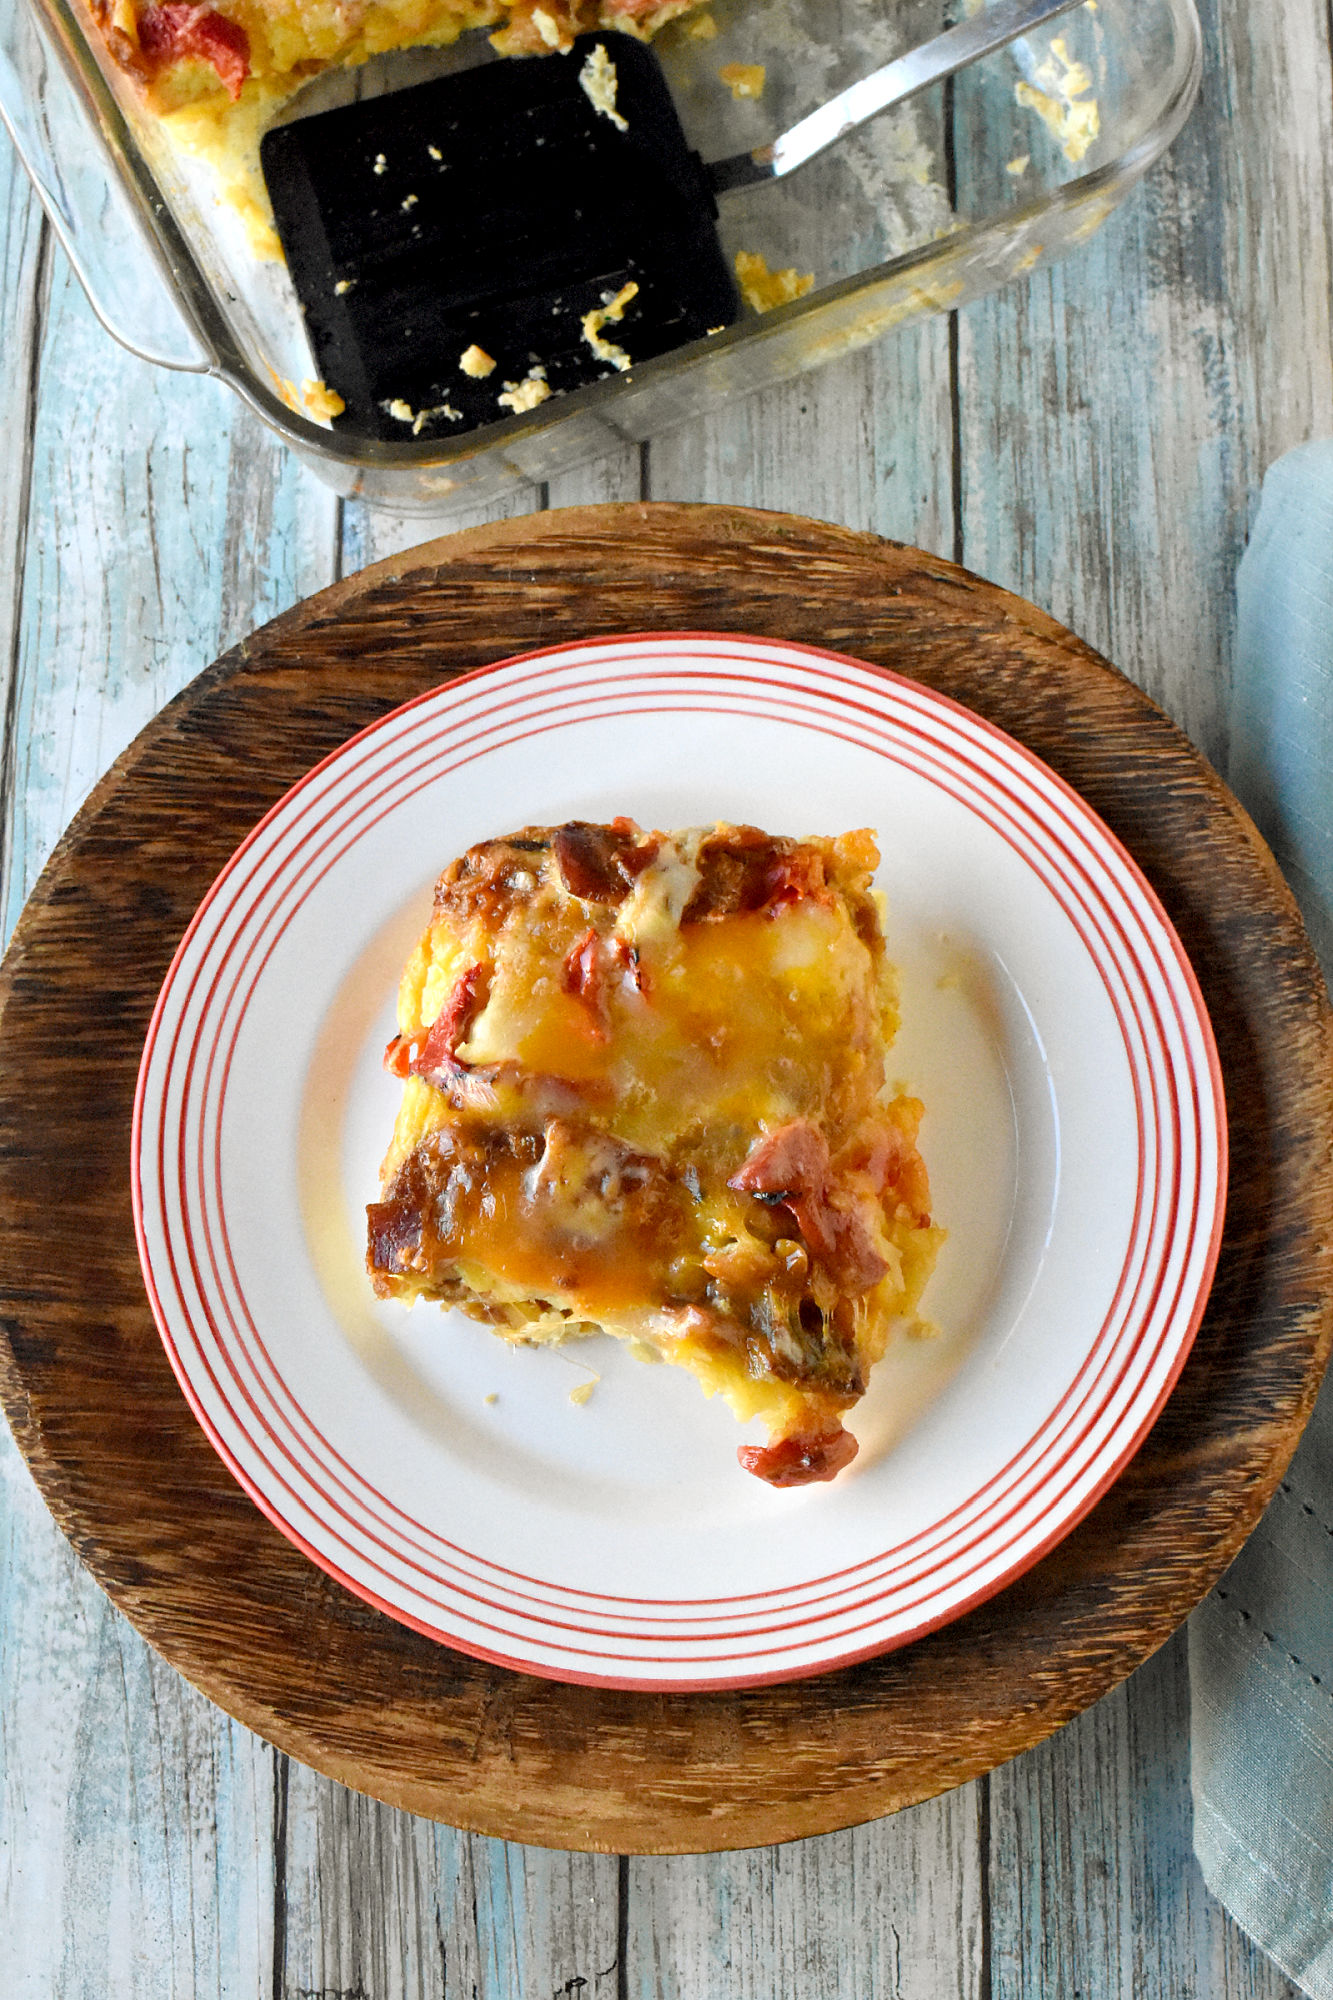 Turn your brunch game up a notch with this Easy Bacon Hashbrown Casserole. Trust us, your taste buds will thank you.  #BaconLoversDelight #BreakfastCasseroleGoals #EasyBreakfastRecipes #HashbrownHeaven #ComfortFoodCravings
